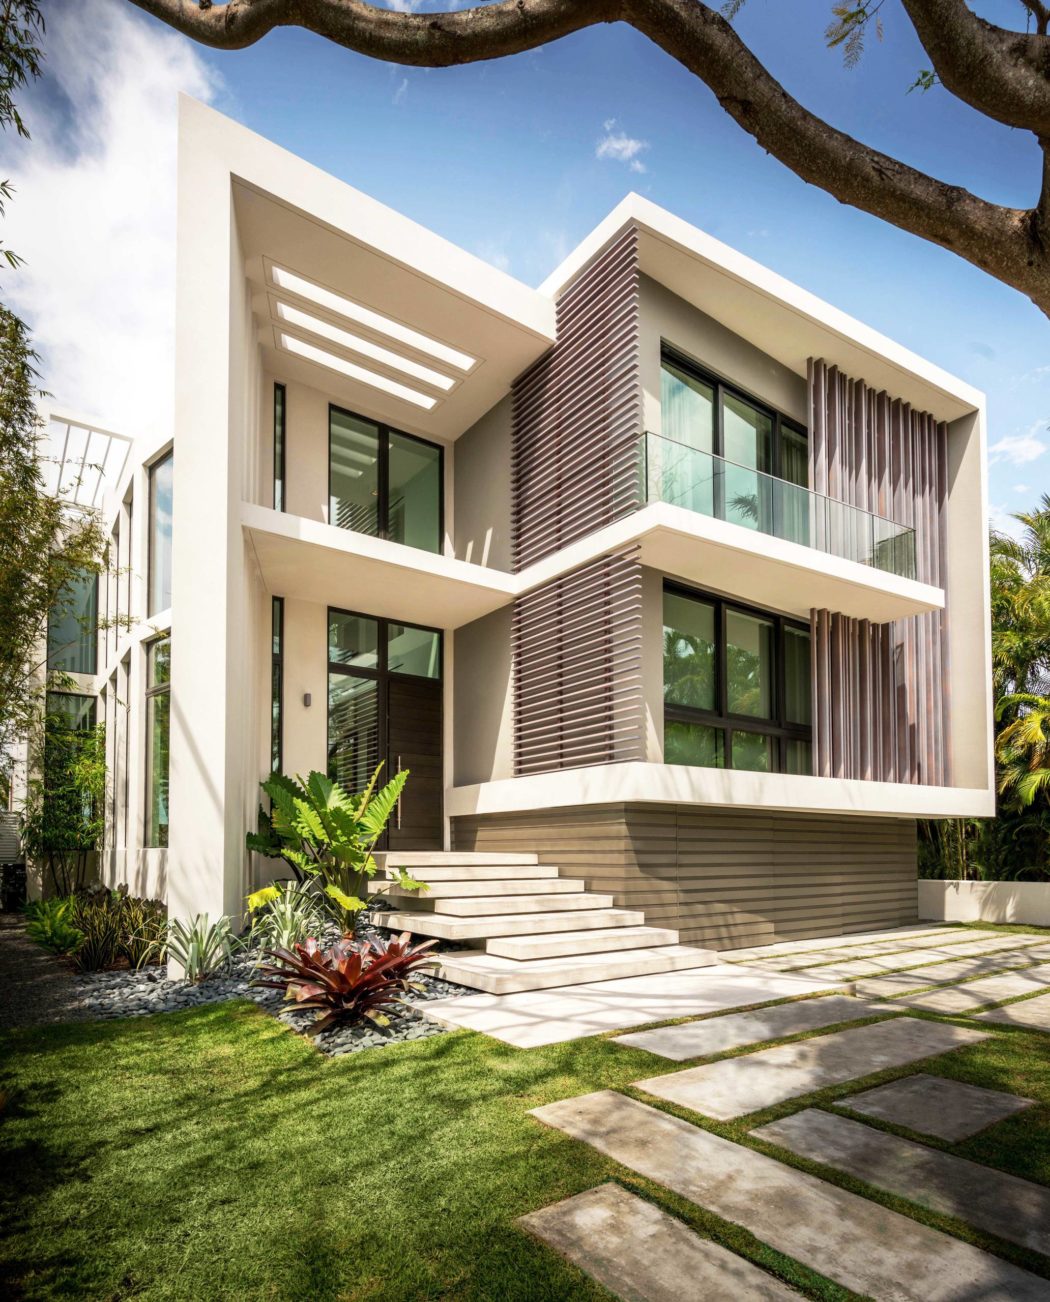 Modern, two-story tropical villa with clean lines, stone steps, and lush vegetation.